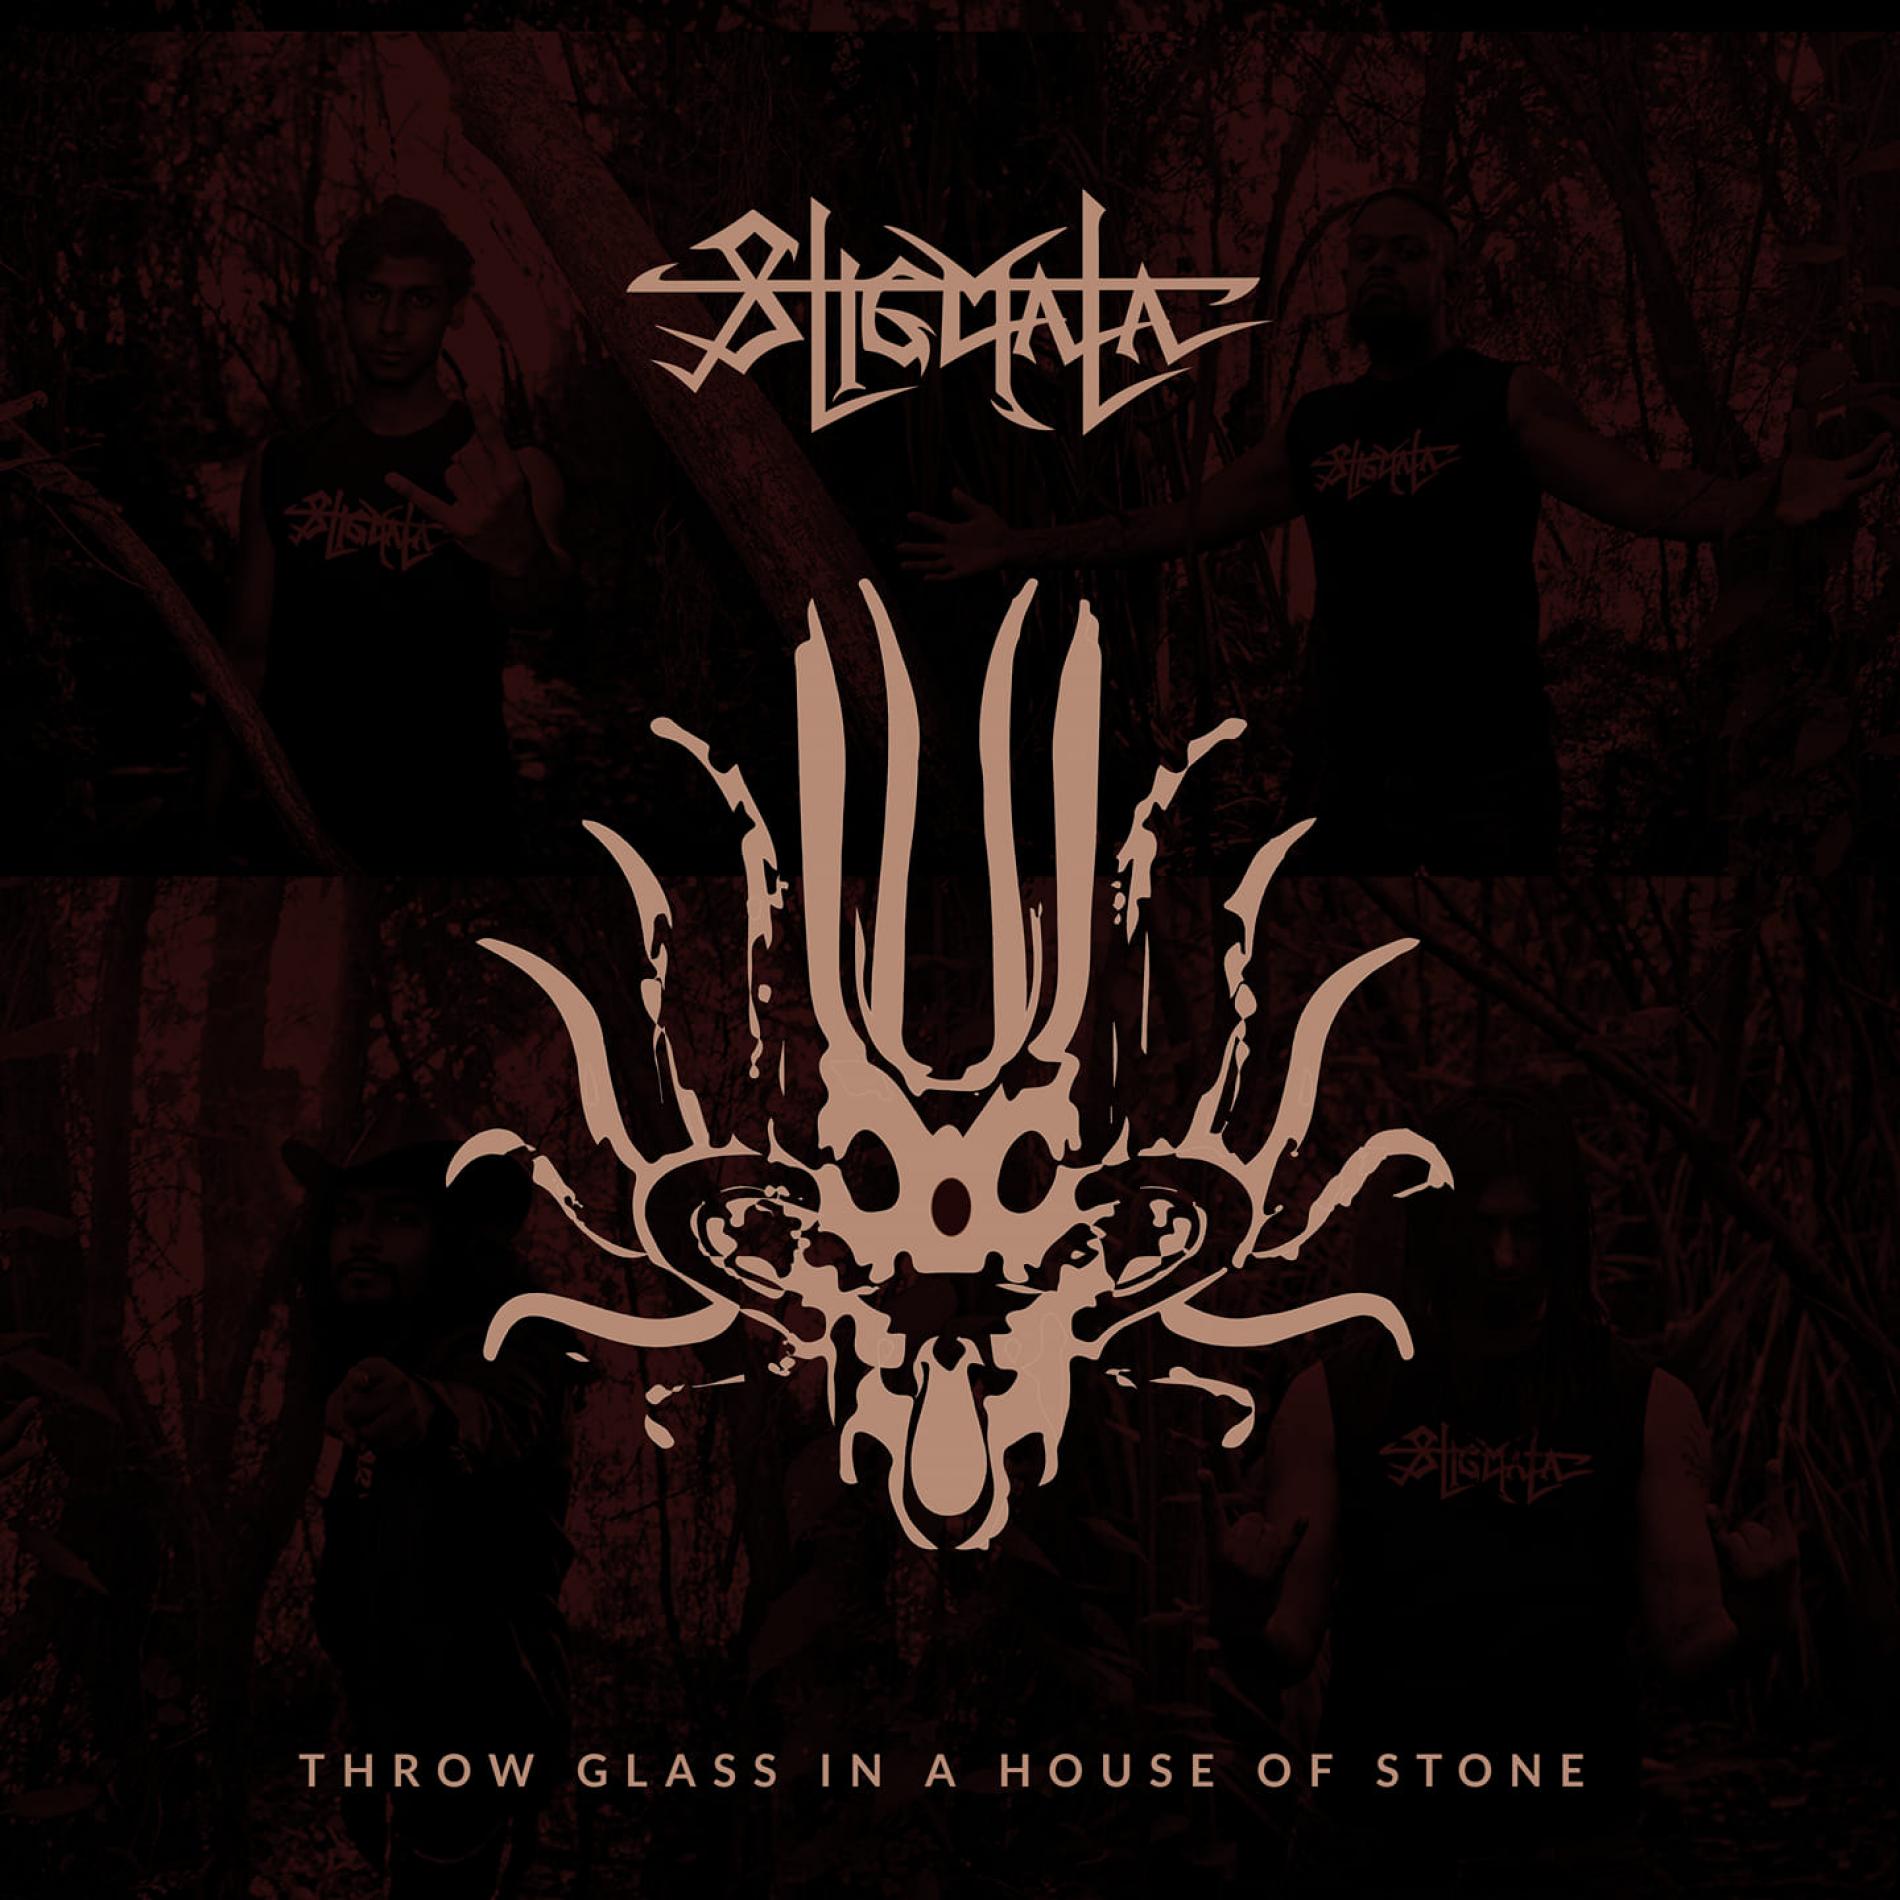 New Music : Stigmata – Throw Glass In A House Of Stone